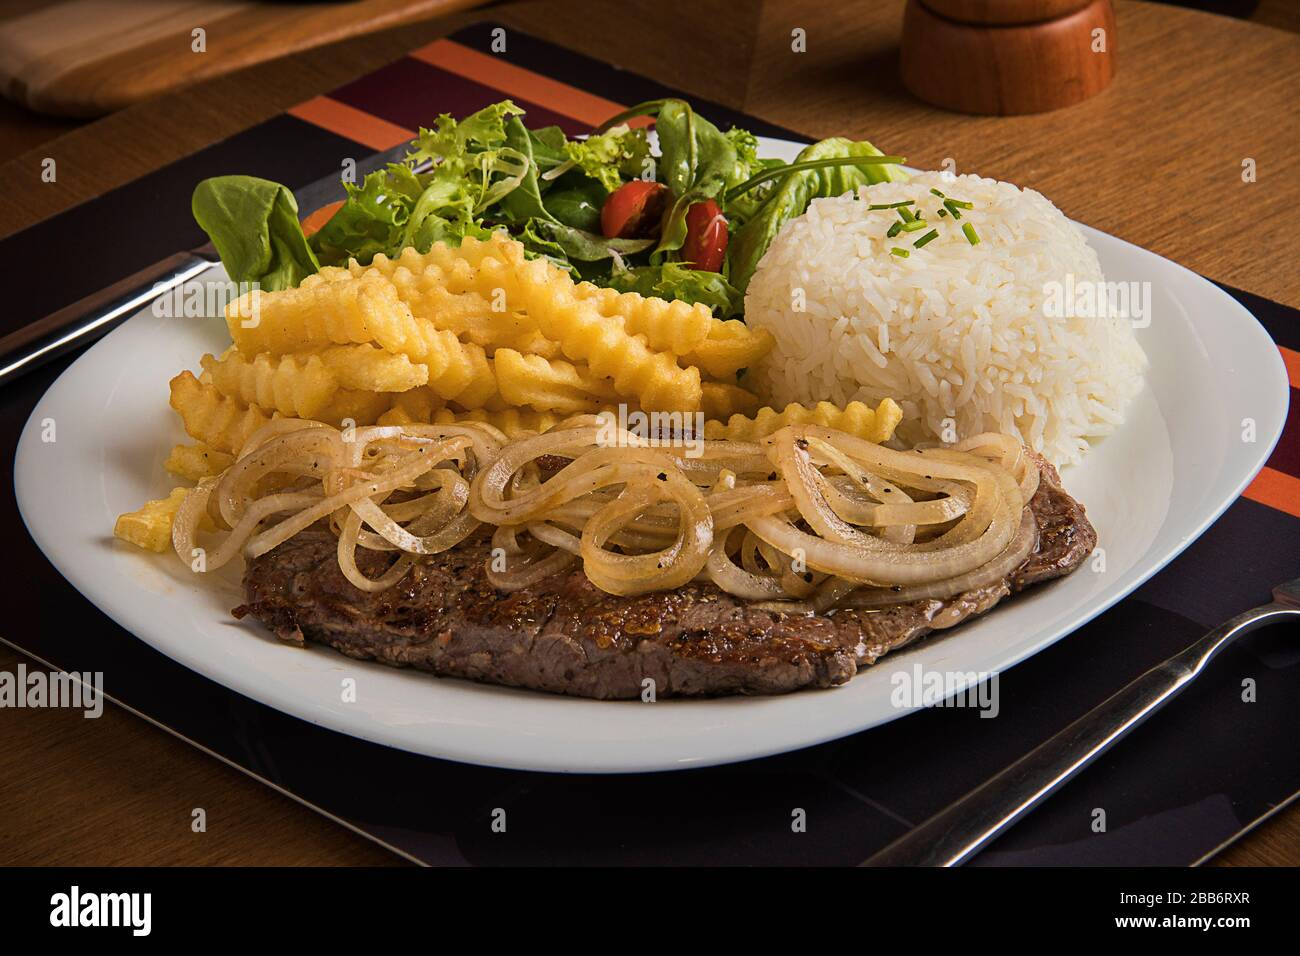 Steak with fried onions, rice, French fries and salad Stock Photo